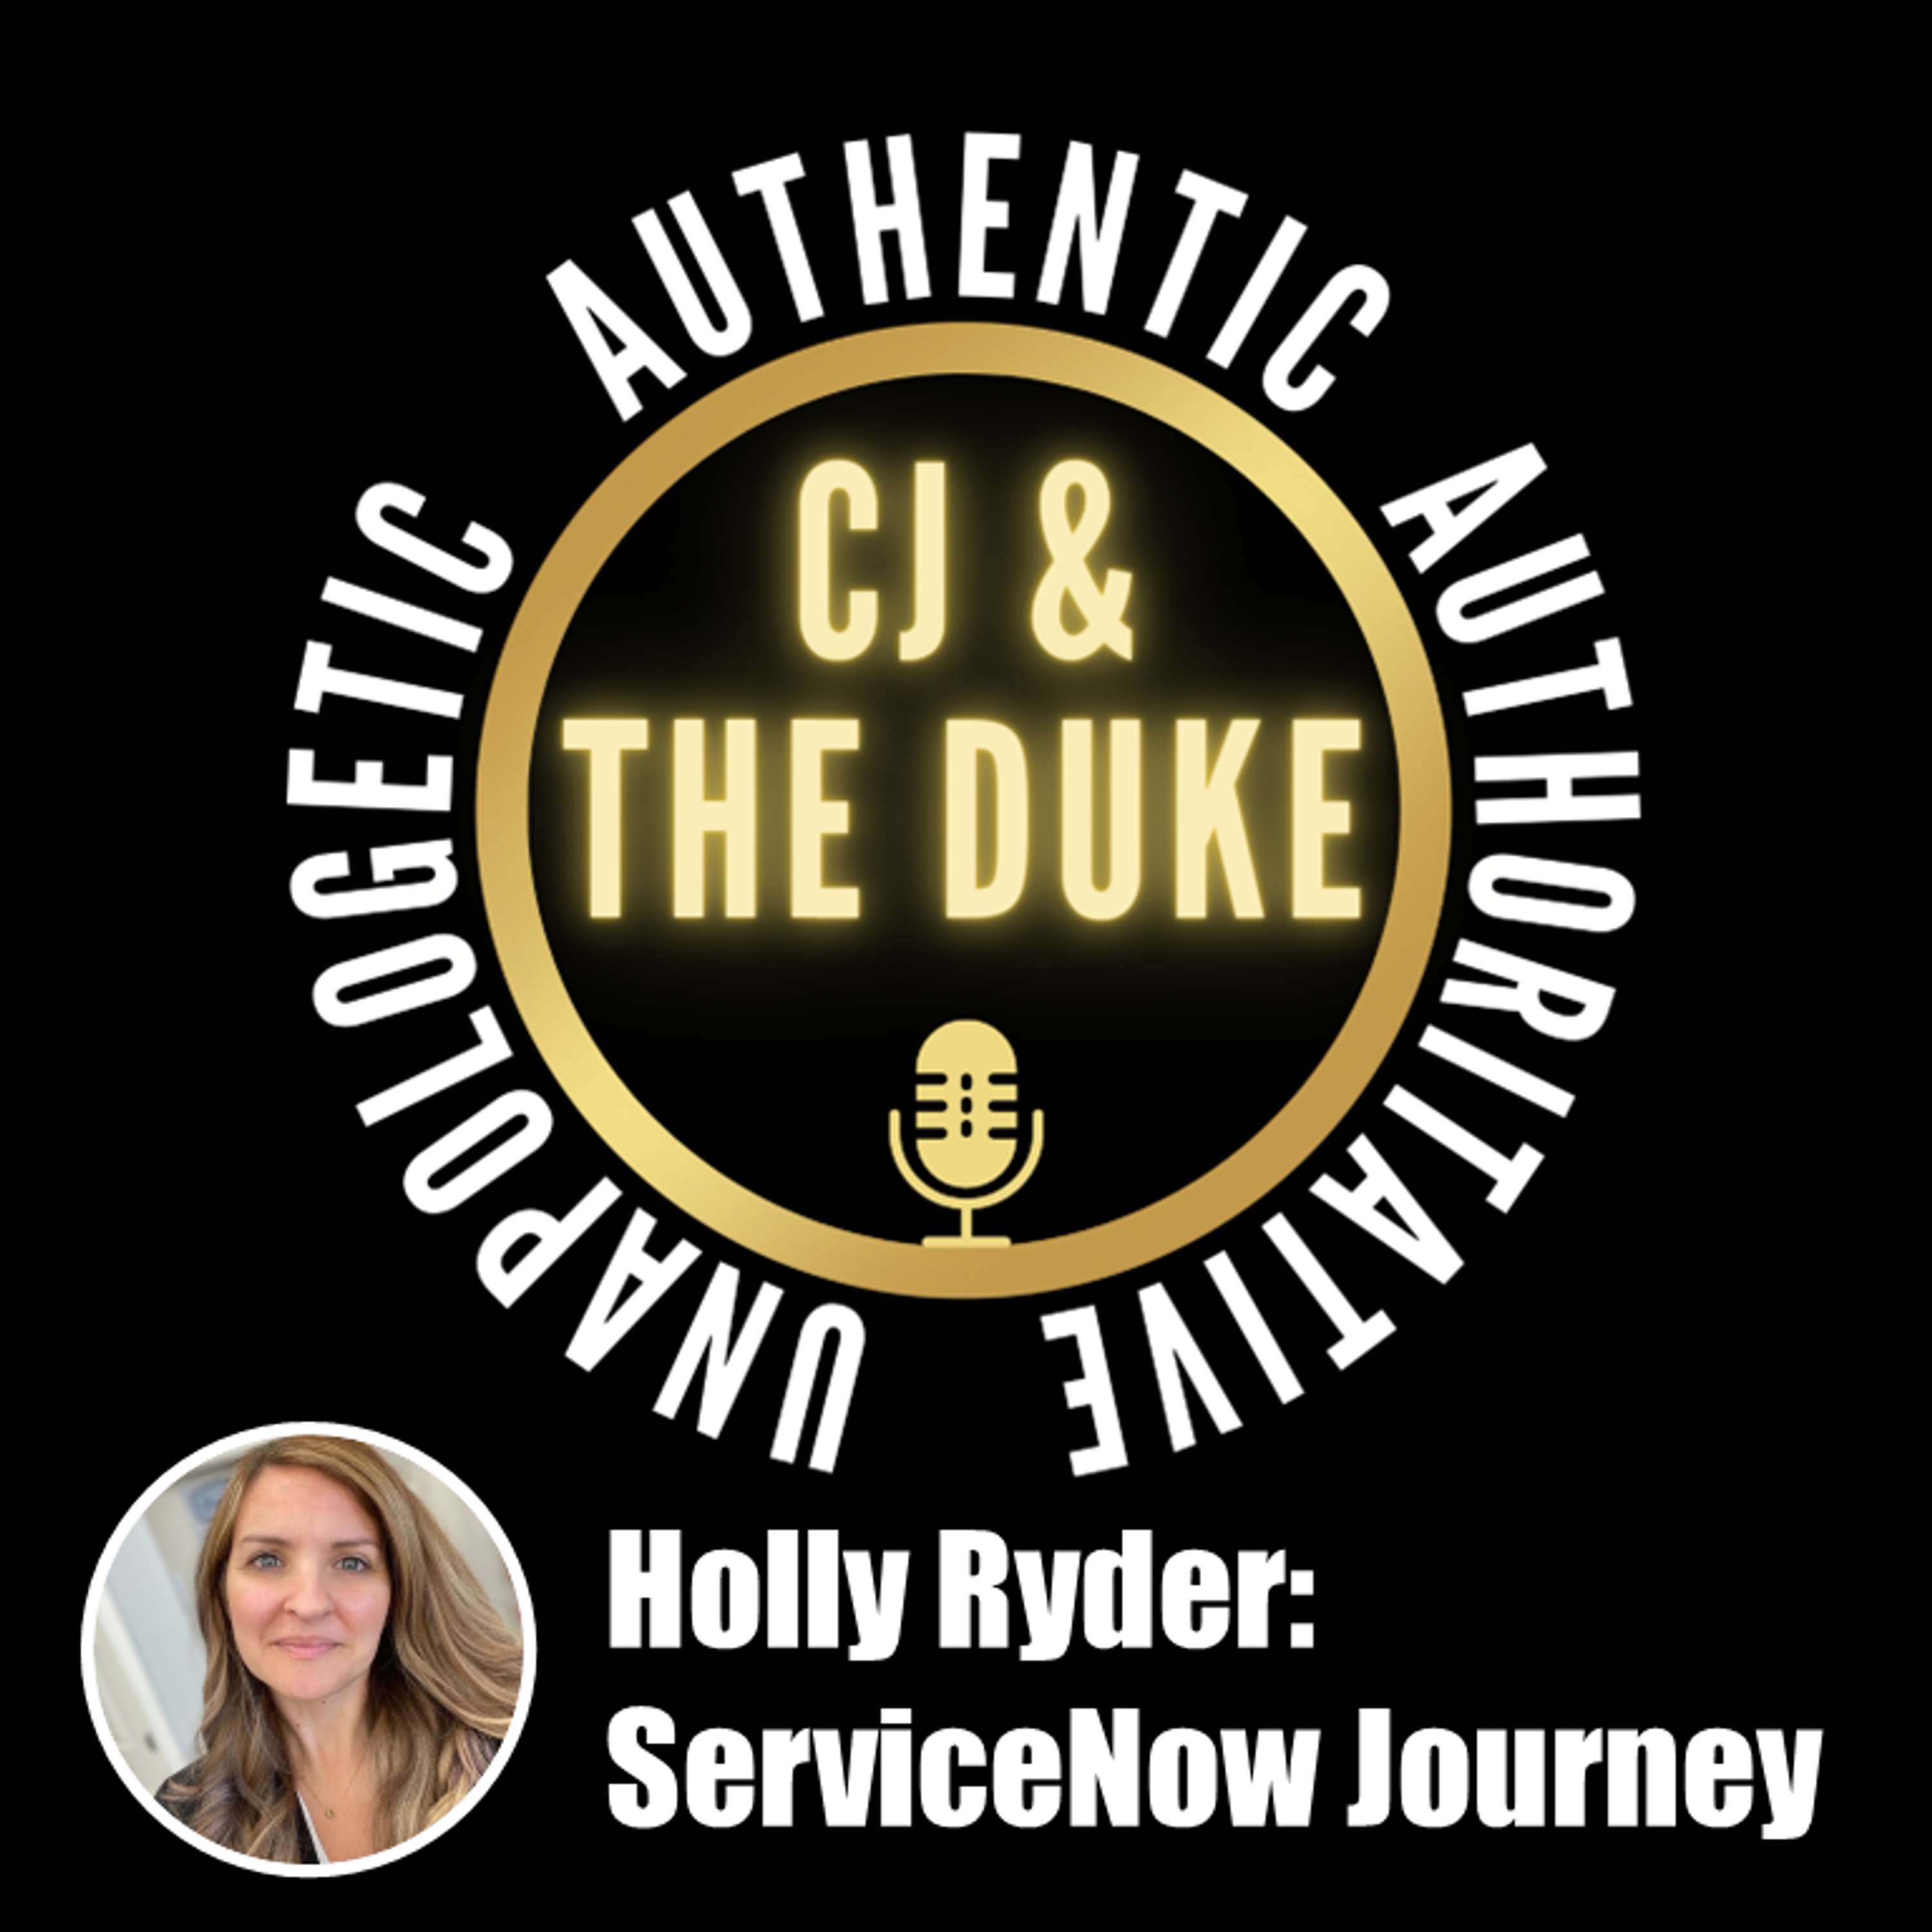 From bridal makeup to ServiceNow expert - Holly Ryder's journey